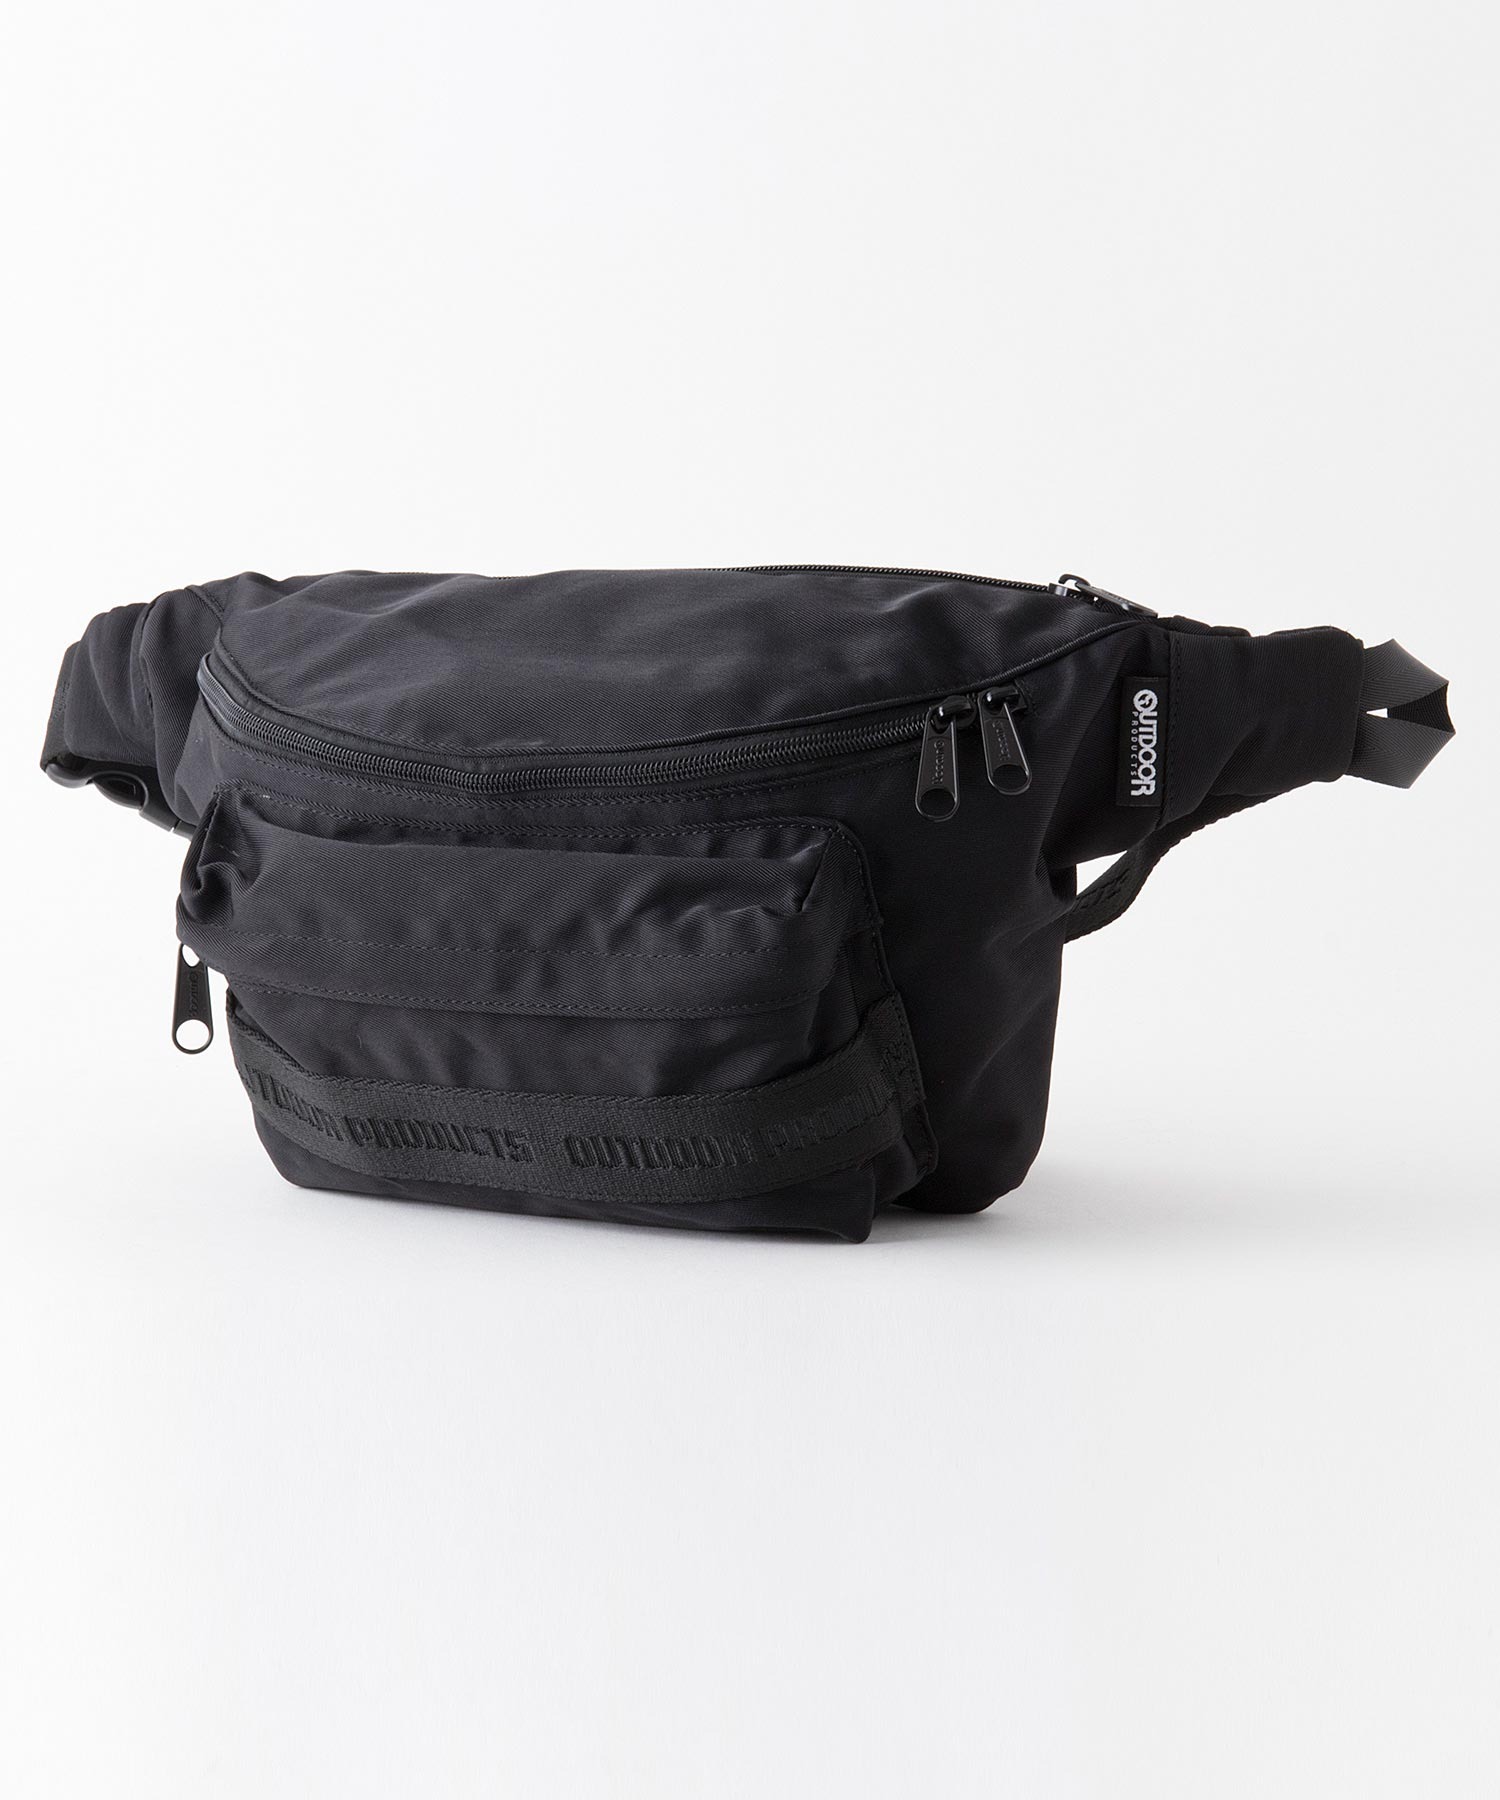 Hillsdale Waistbag ウエストポーチ ウエストバッグ ブランドロゴ Outdoor Products アウトドア プロダクツ Outdoor Products 公式通販サイト